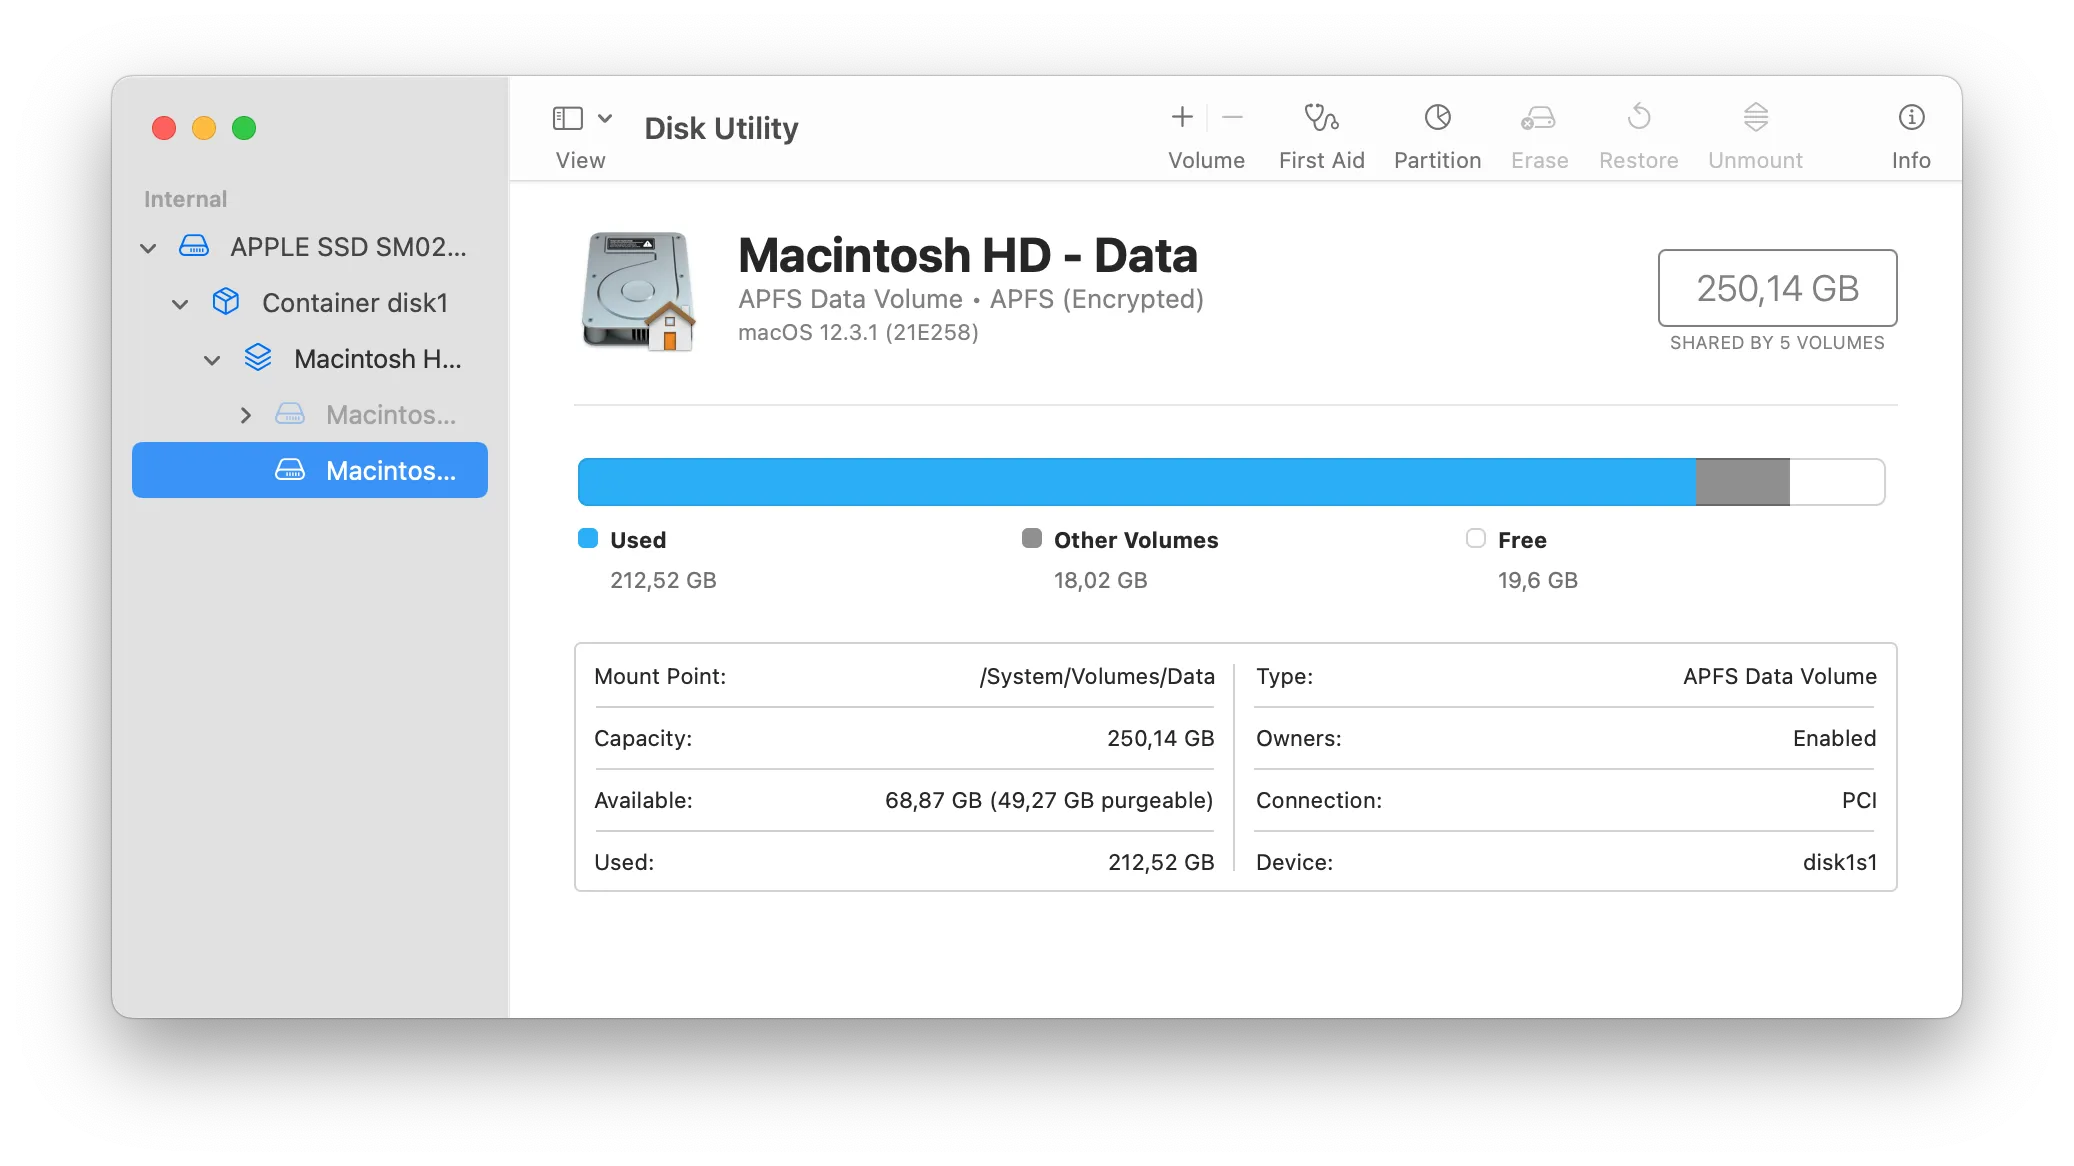 The real amount of free space in the Disk Utility app